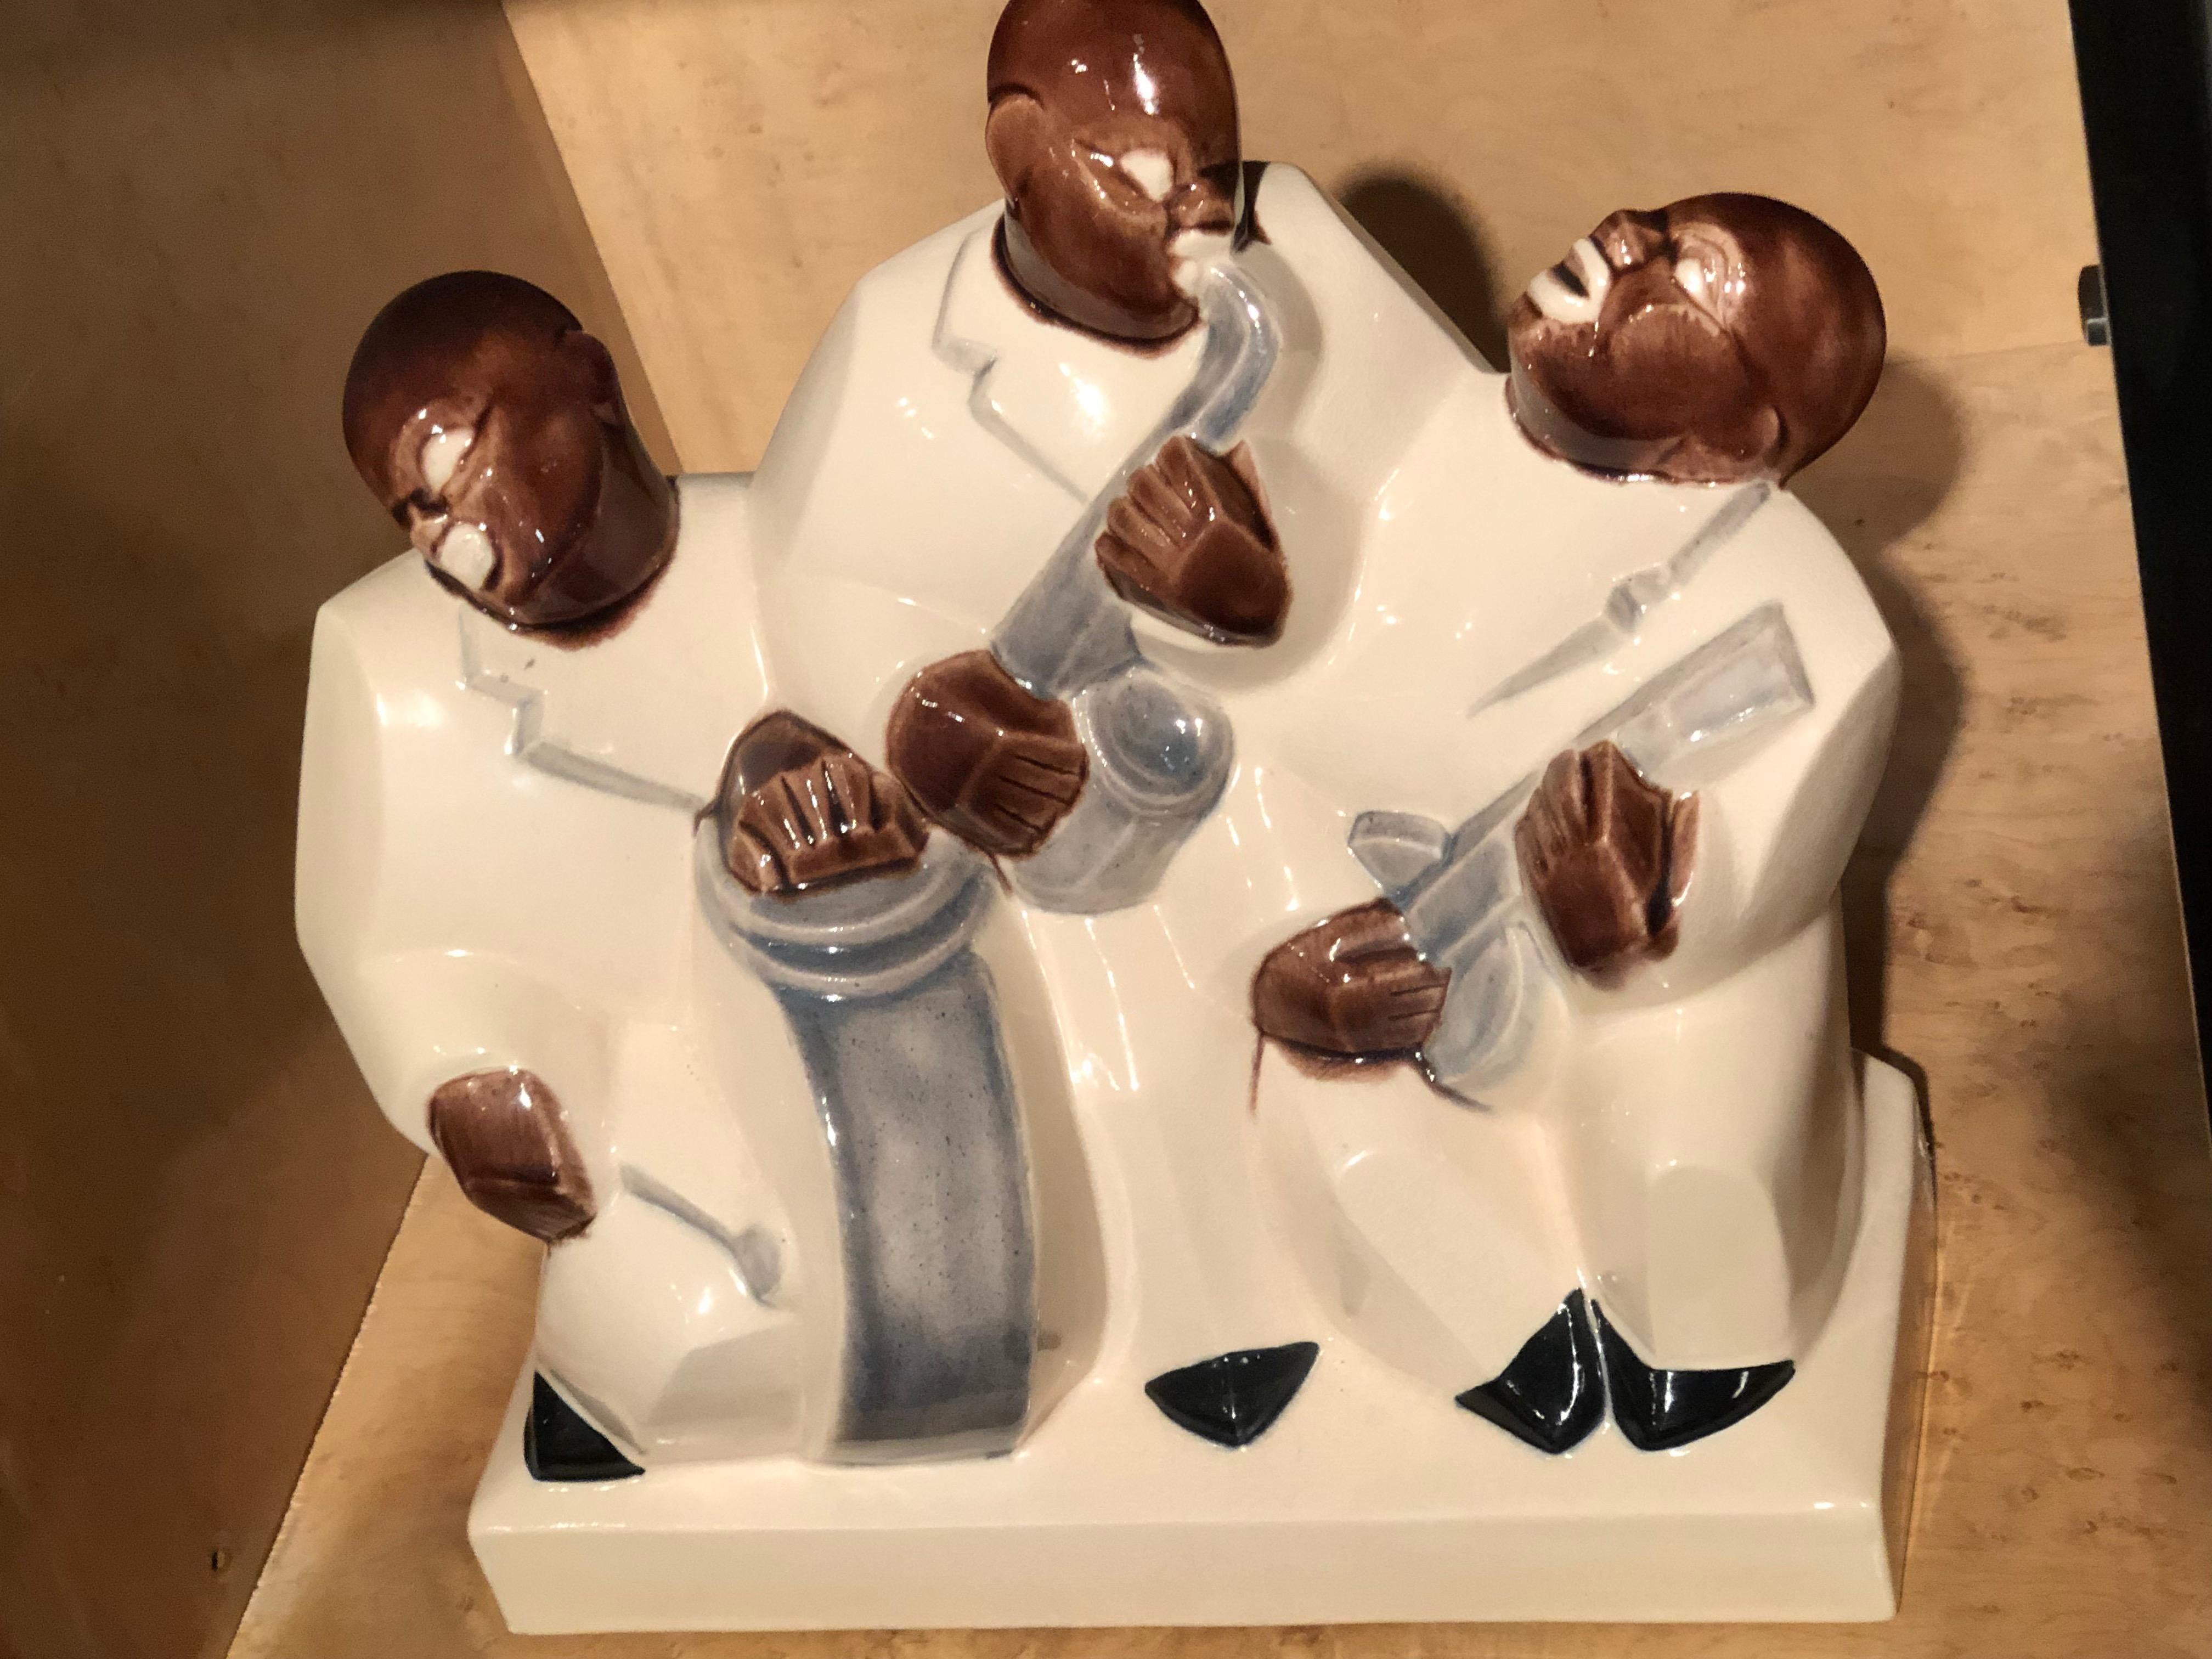 Rare sculpture of black jazz trio sculpted in ceramic and styled from the Art Deco era, circa 1930. This rare sculpture depicts a European view of the hot jazz age, Horn, banjo and drums. All 3 images are integrated with an angular cubist style.